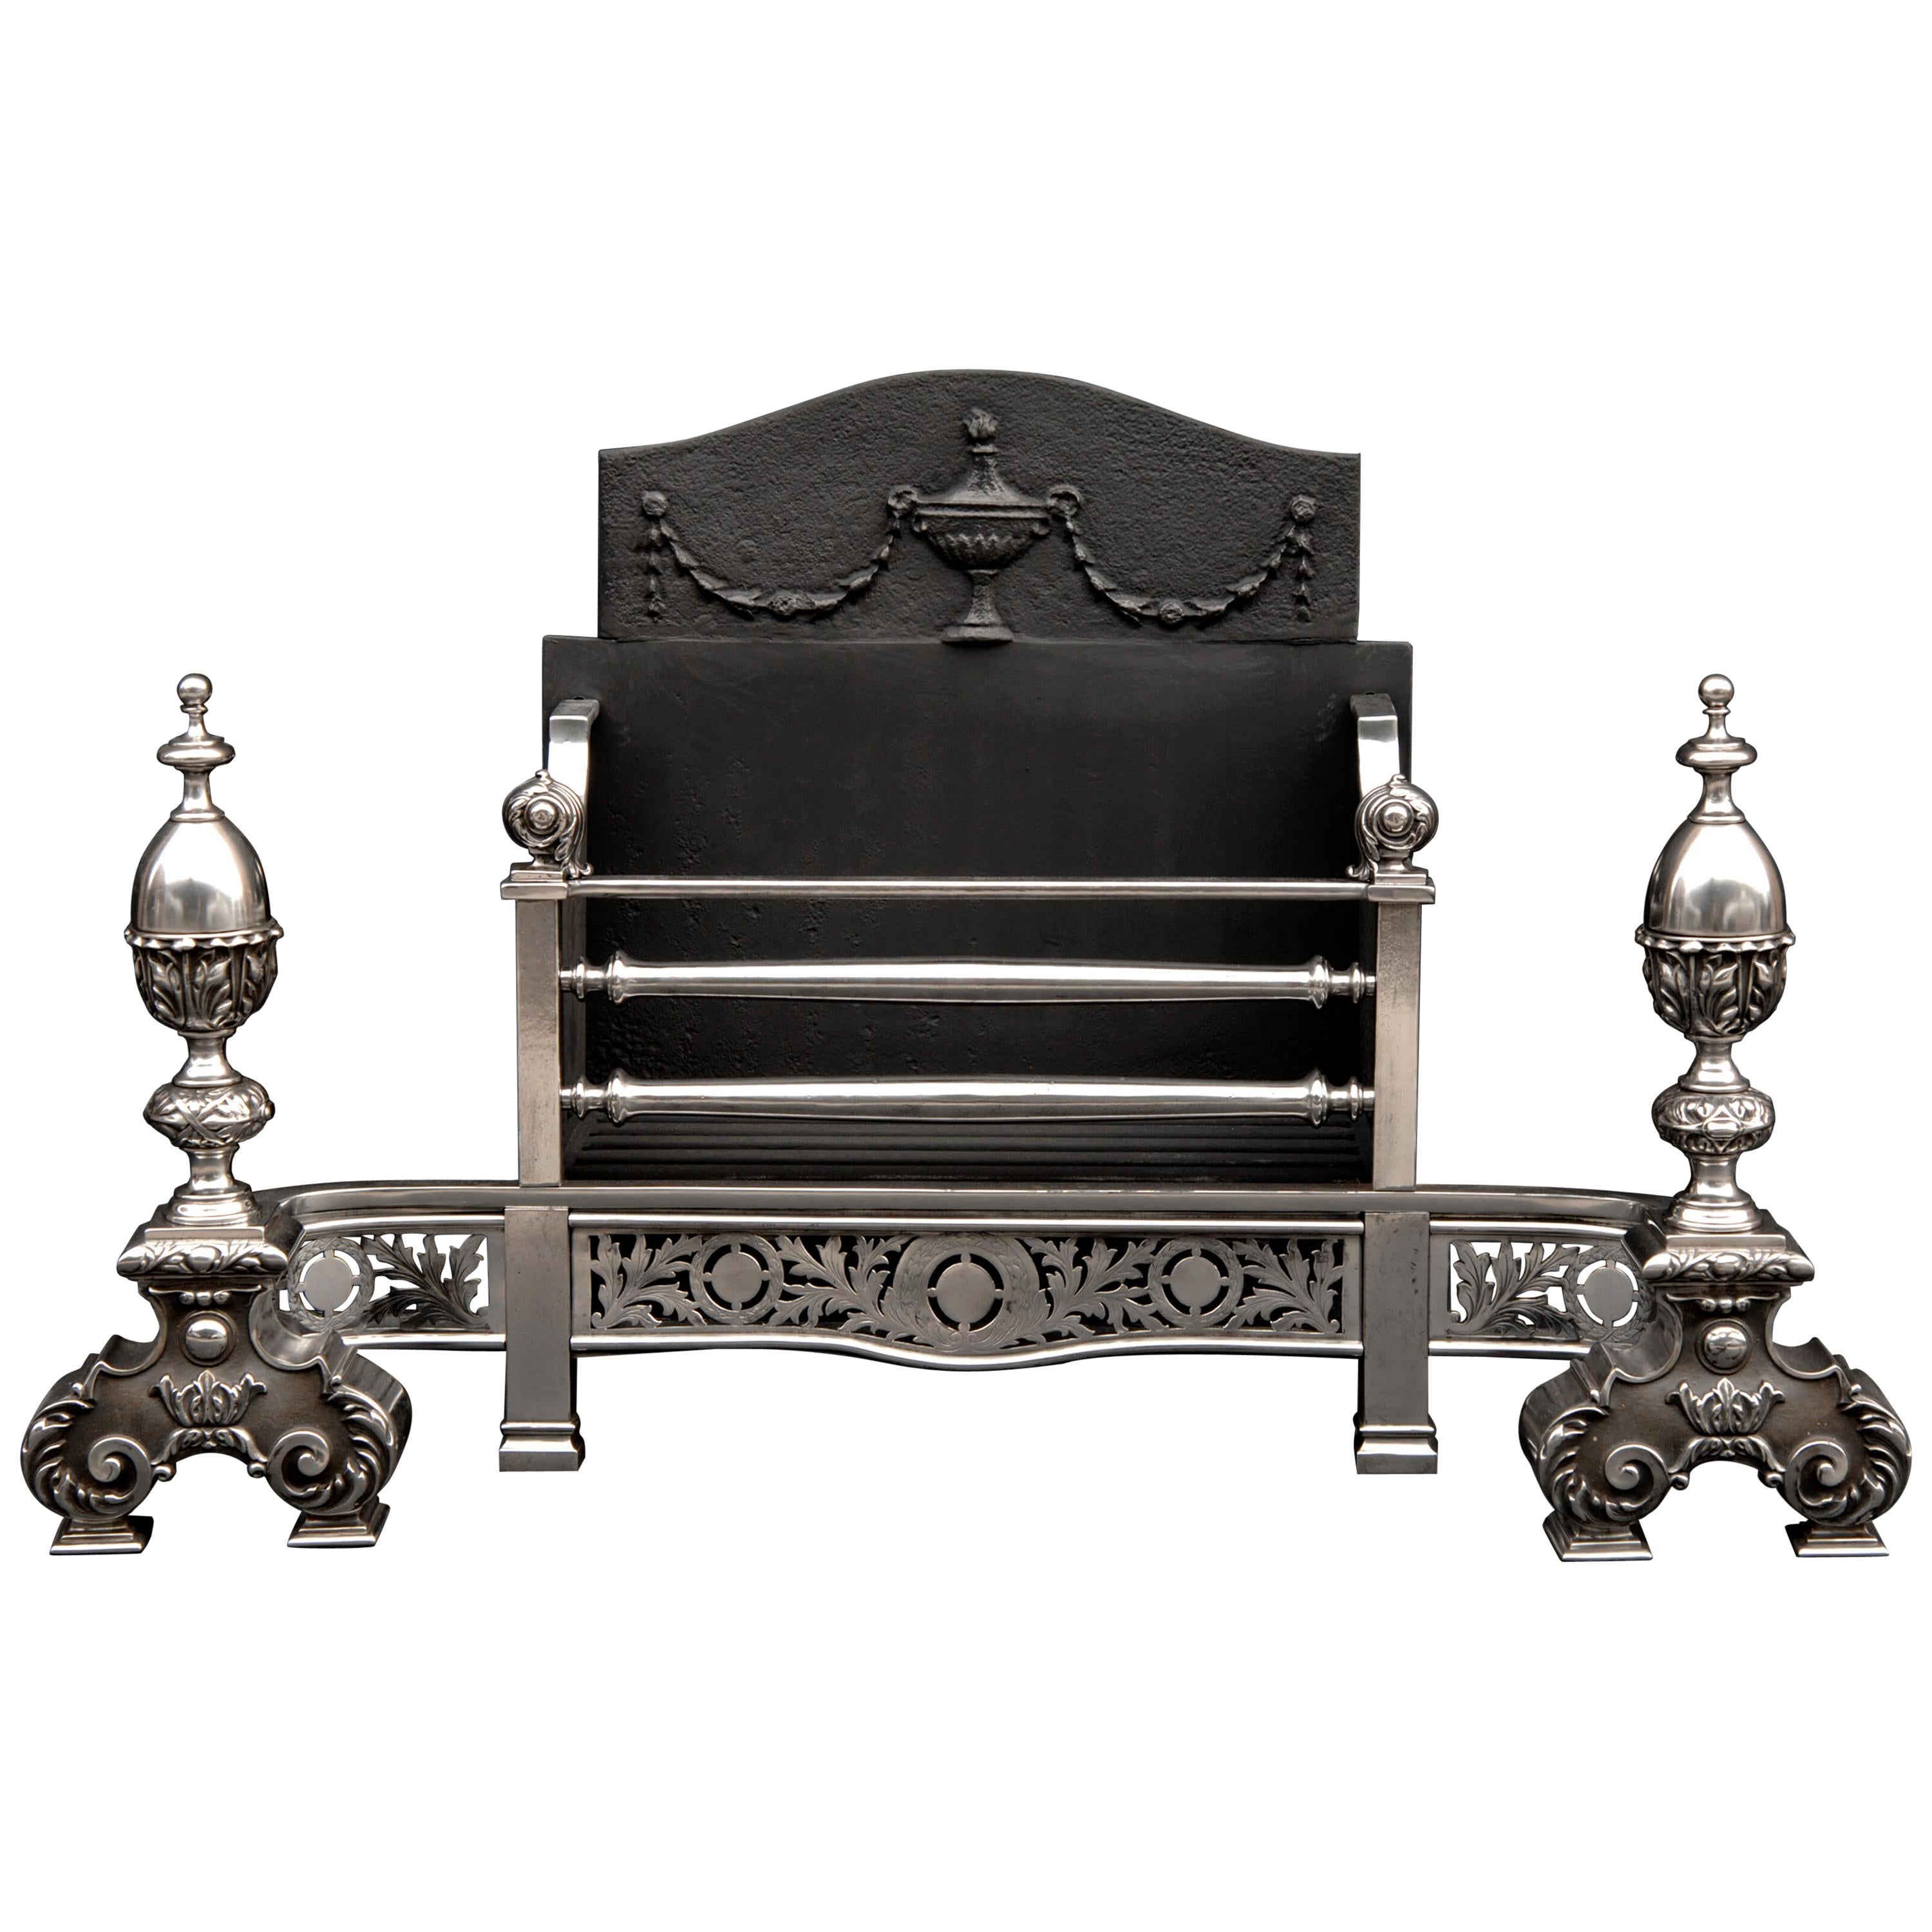 Fine Quality 19th Century English George III Style Steel Firegrate For Sale